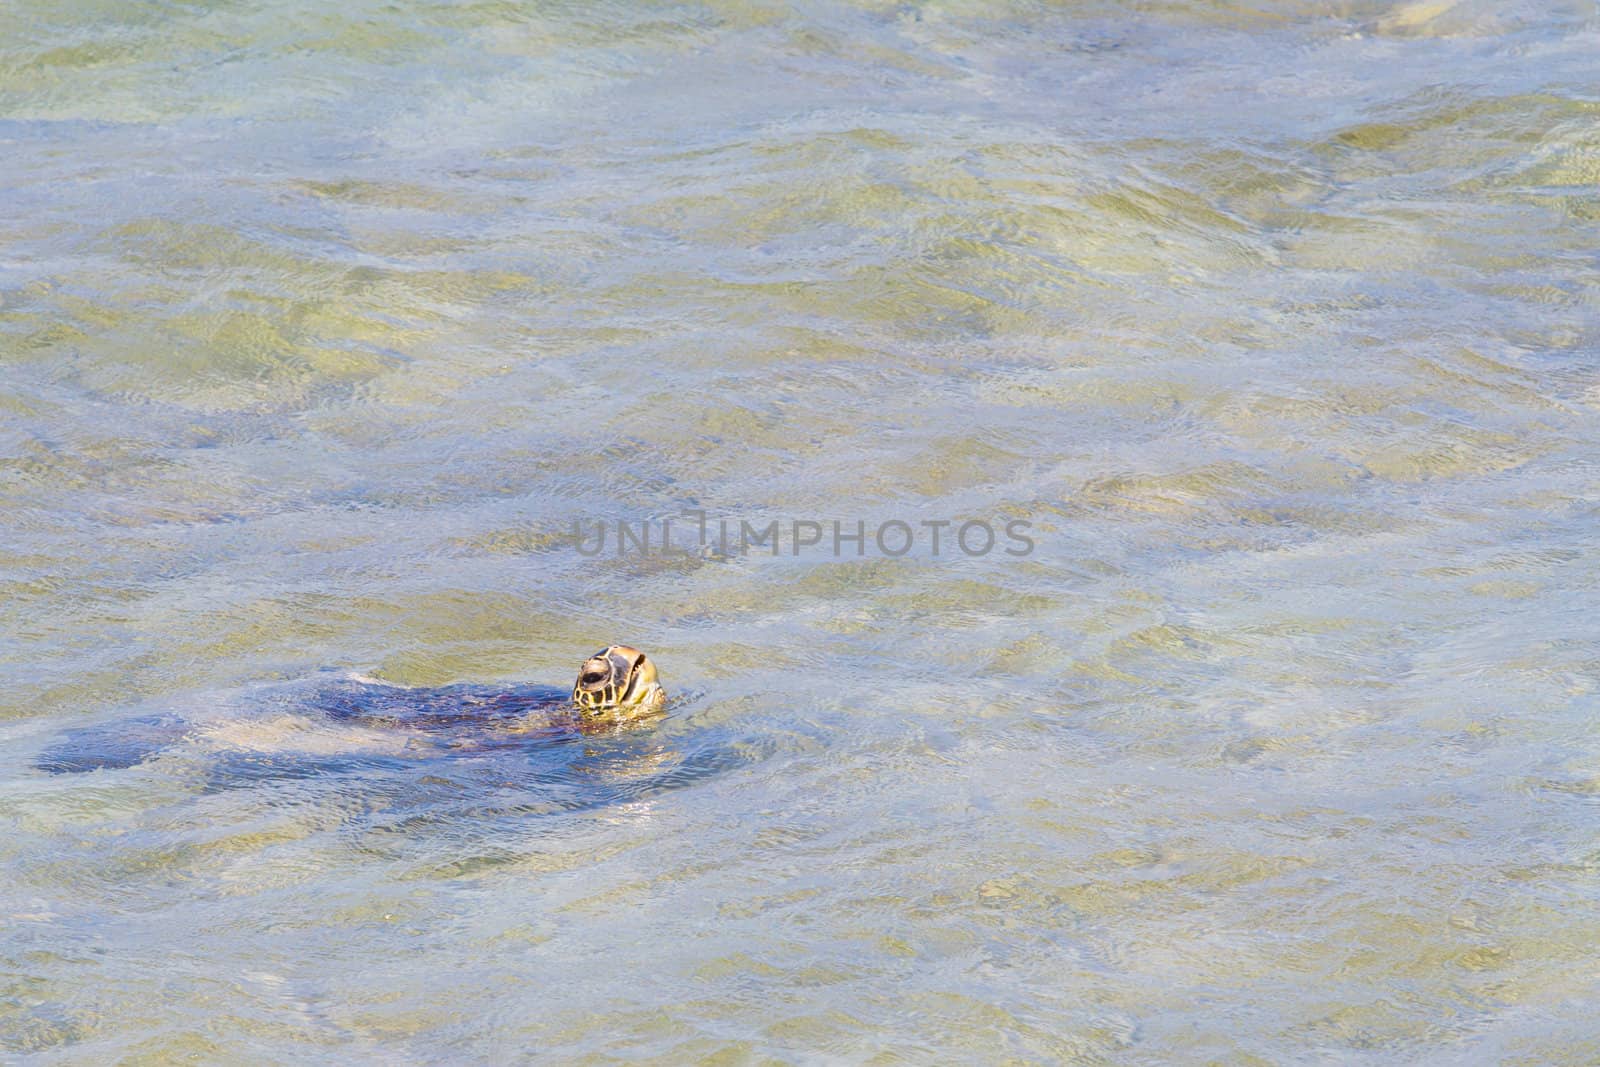 A rare image of a sea turtle coming up for air in the ocean water of the north shore of Oahu. This amazing animal is swimming in the waves and coming up to breathe only occasionally.